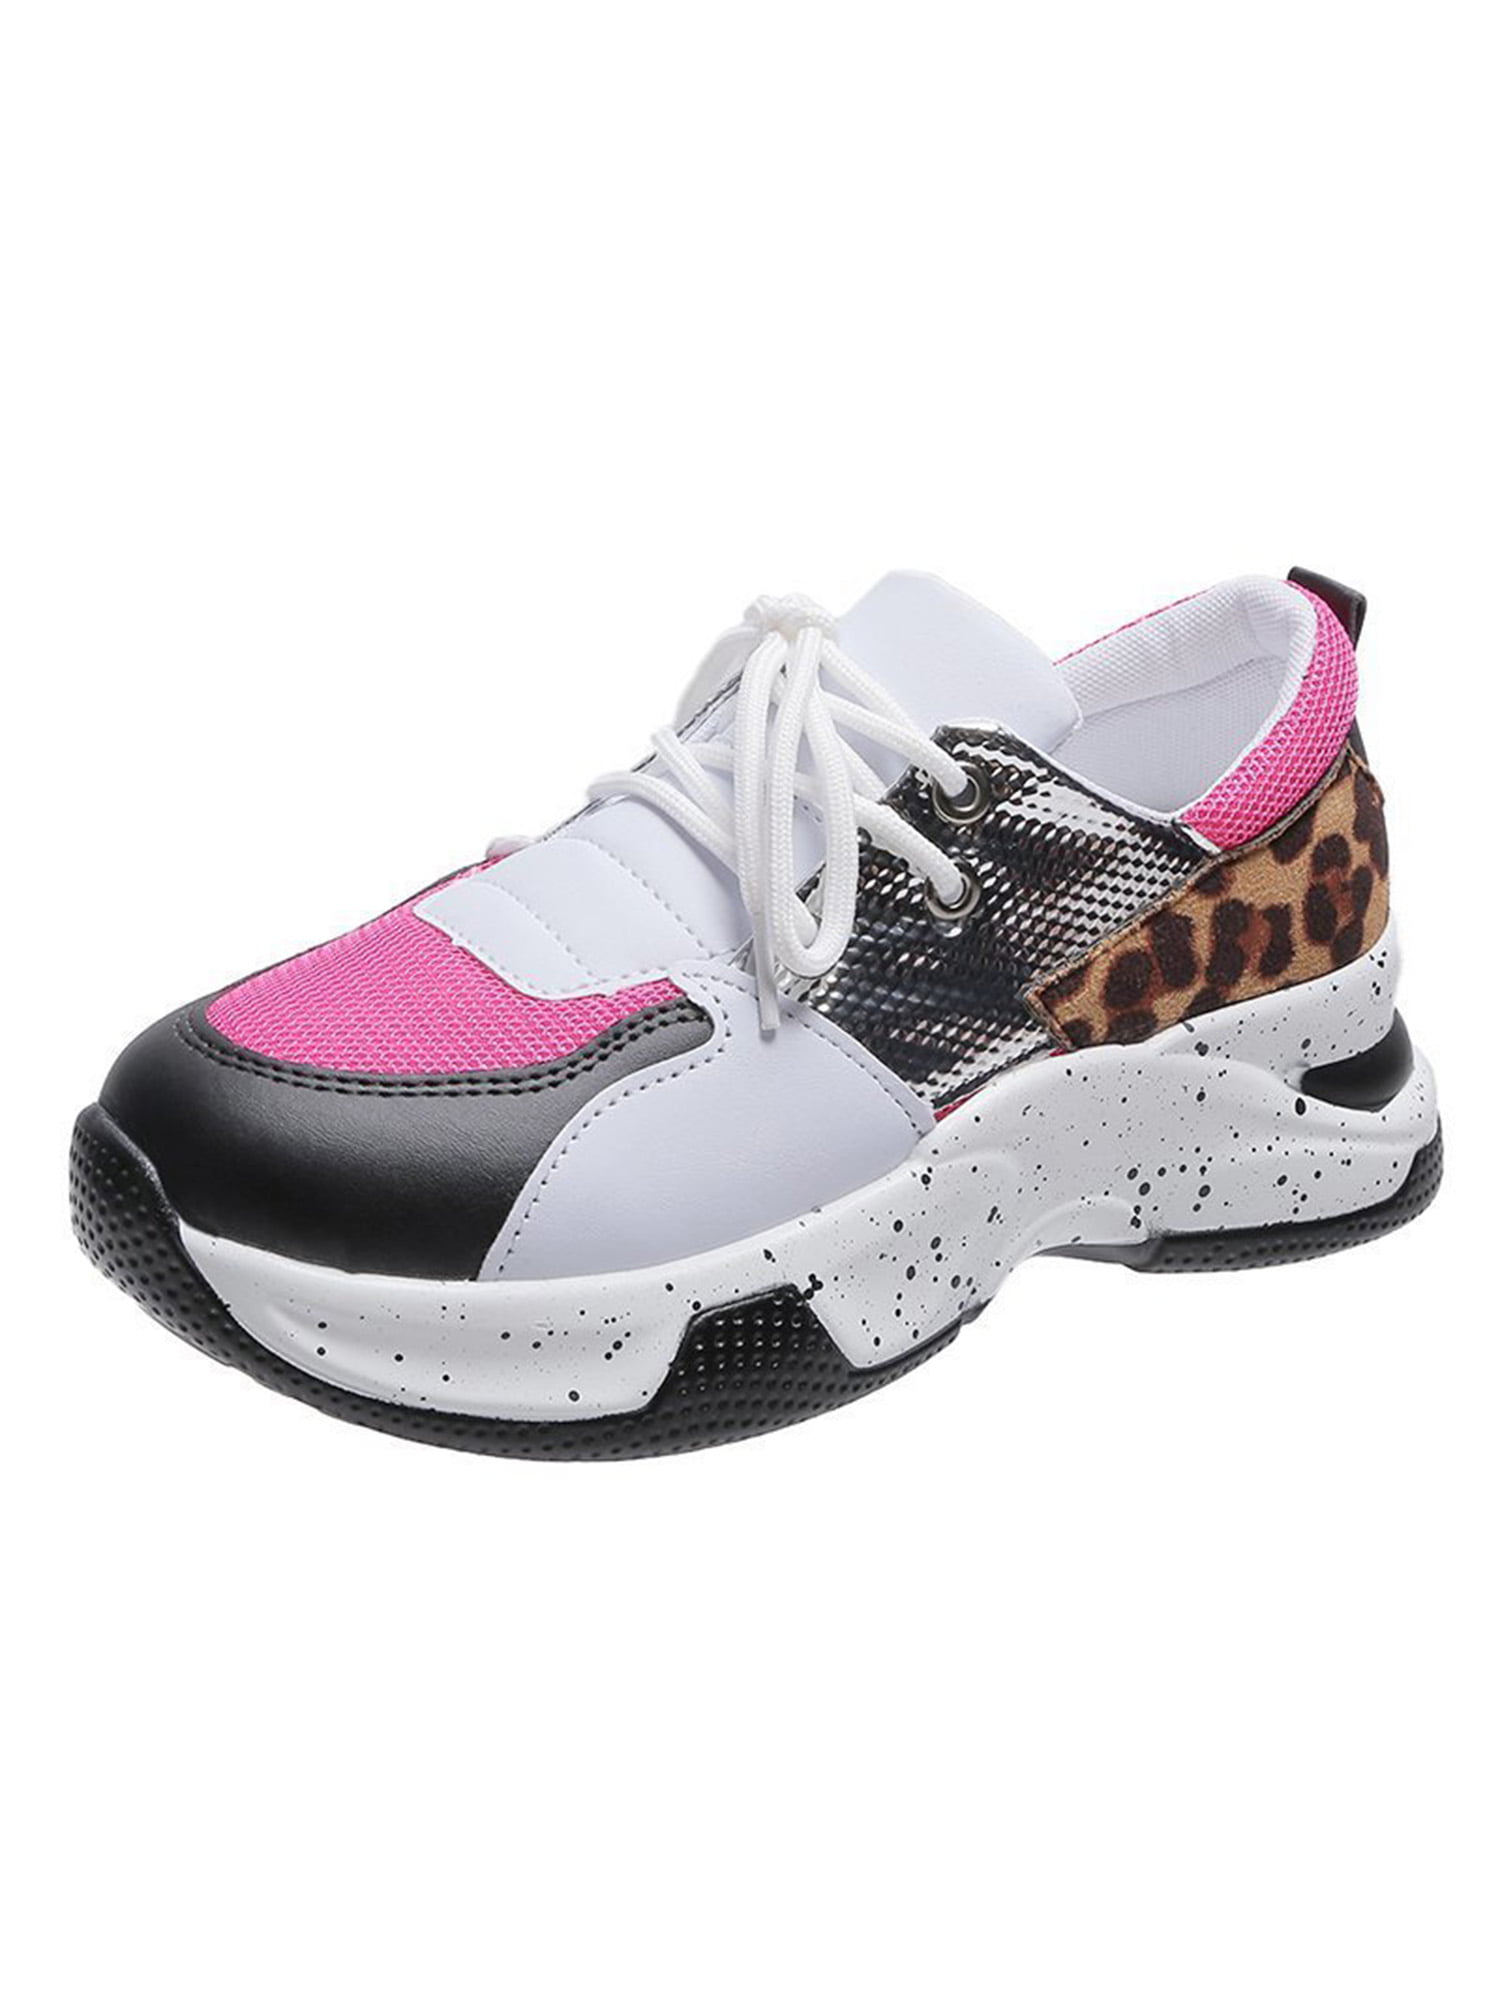 Lace-Up Sneaker multicolored casual look Shoes Sneakers Lace-Up Sneakers 